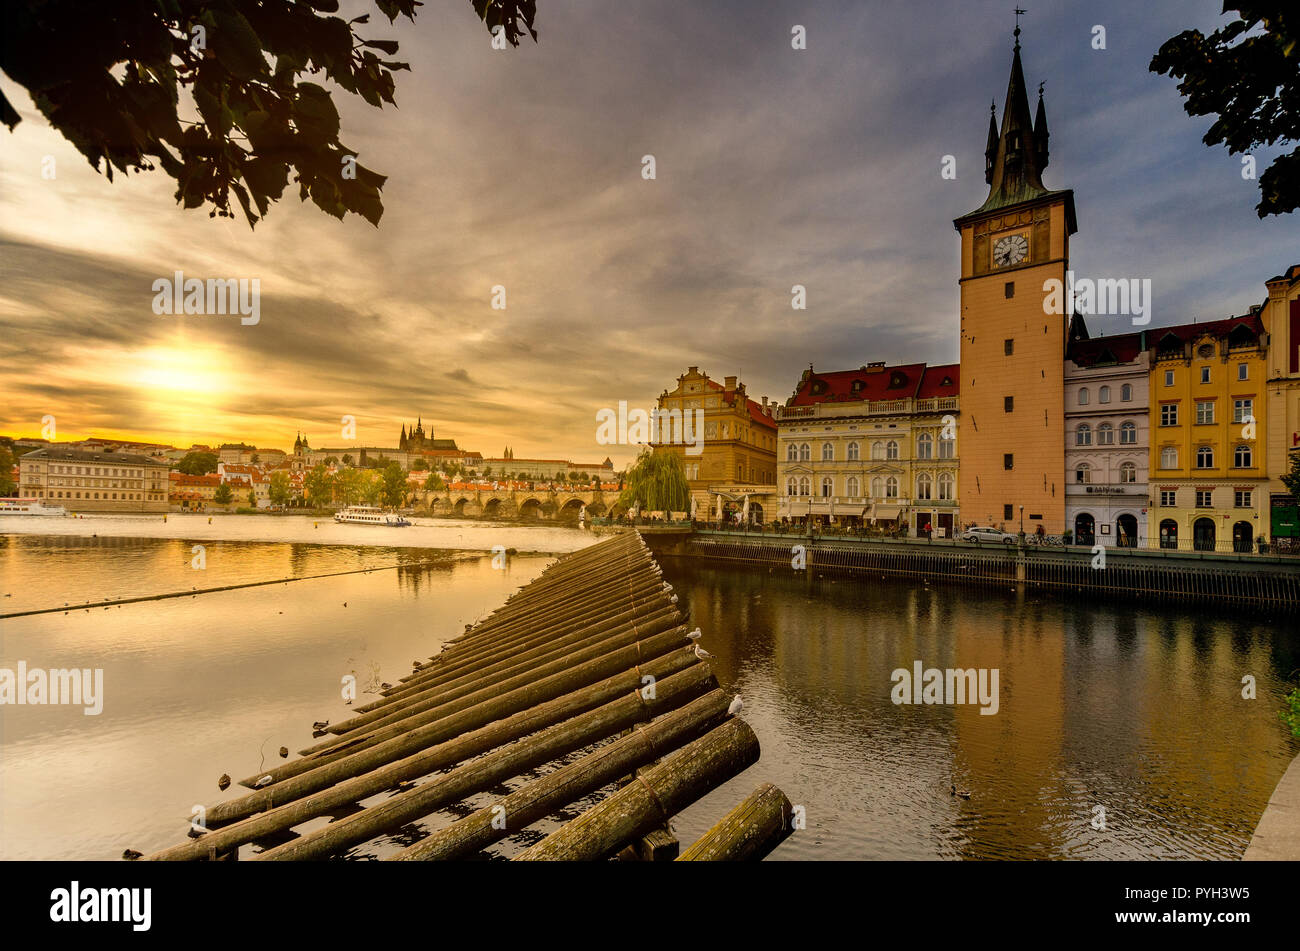 Vltava river from Smetana embankment, Lavka riverbank, Old Town Water Tower. In the backgroun Charles Bridge and Hradcany hill. Stock Photo